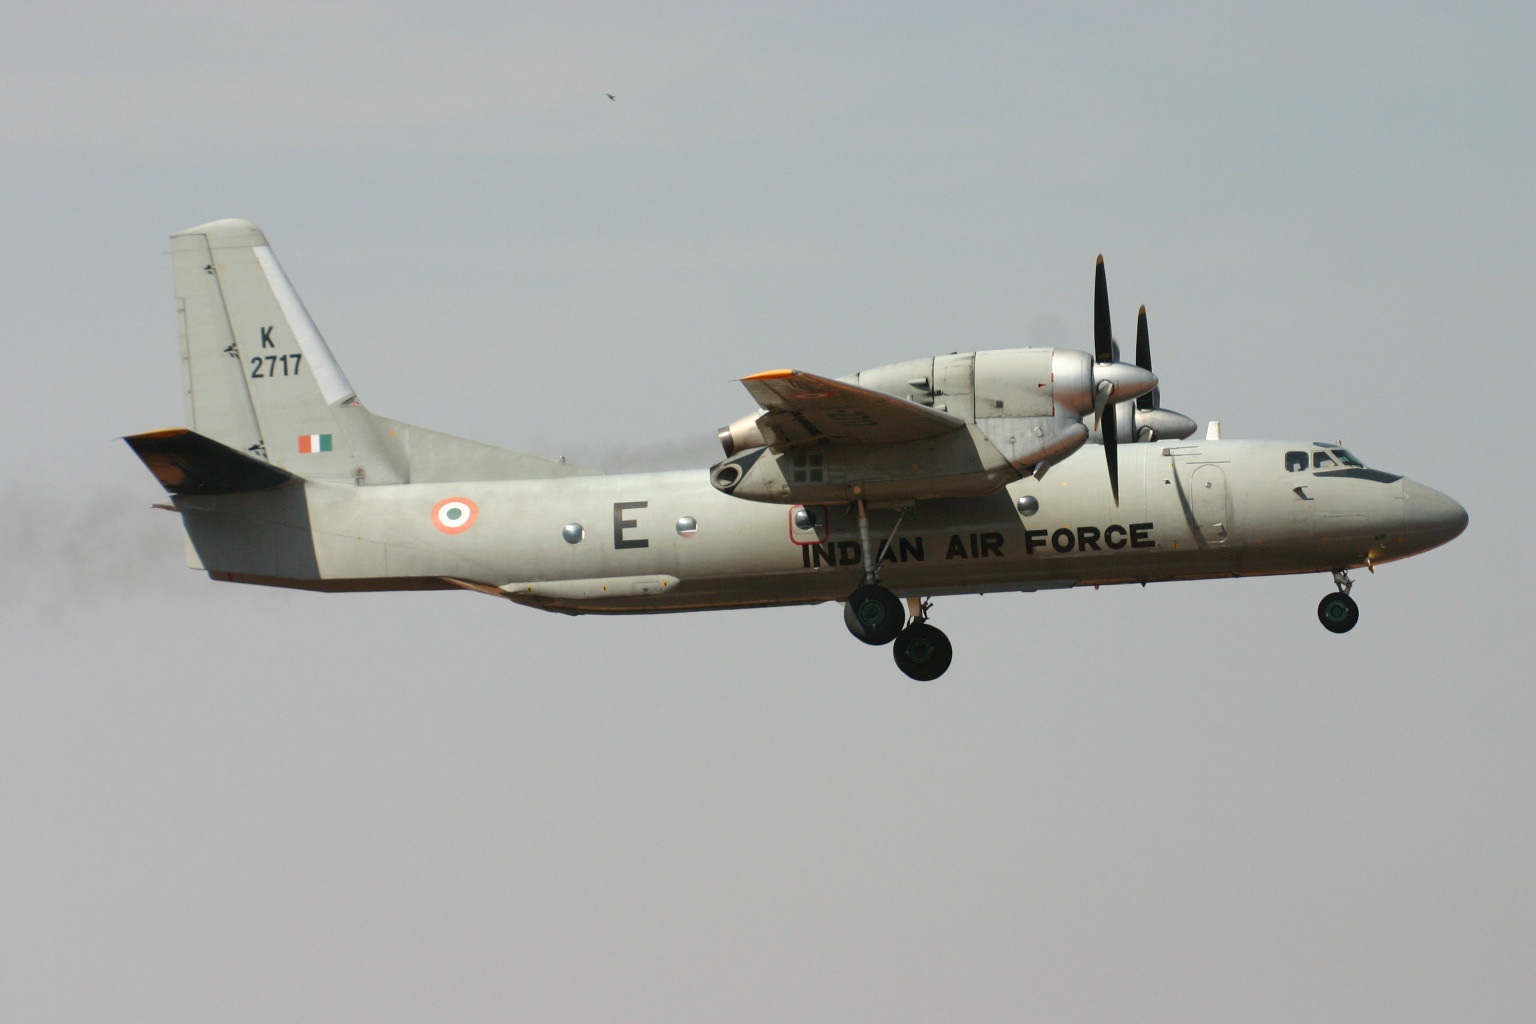 All possible steps will be taken to locate the plane and personnel, IAF Chief assures families of missing air-warriors